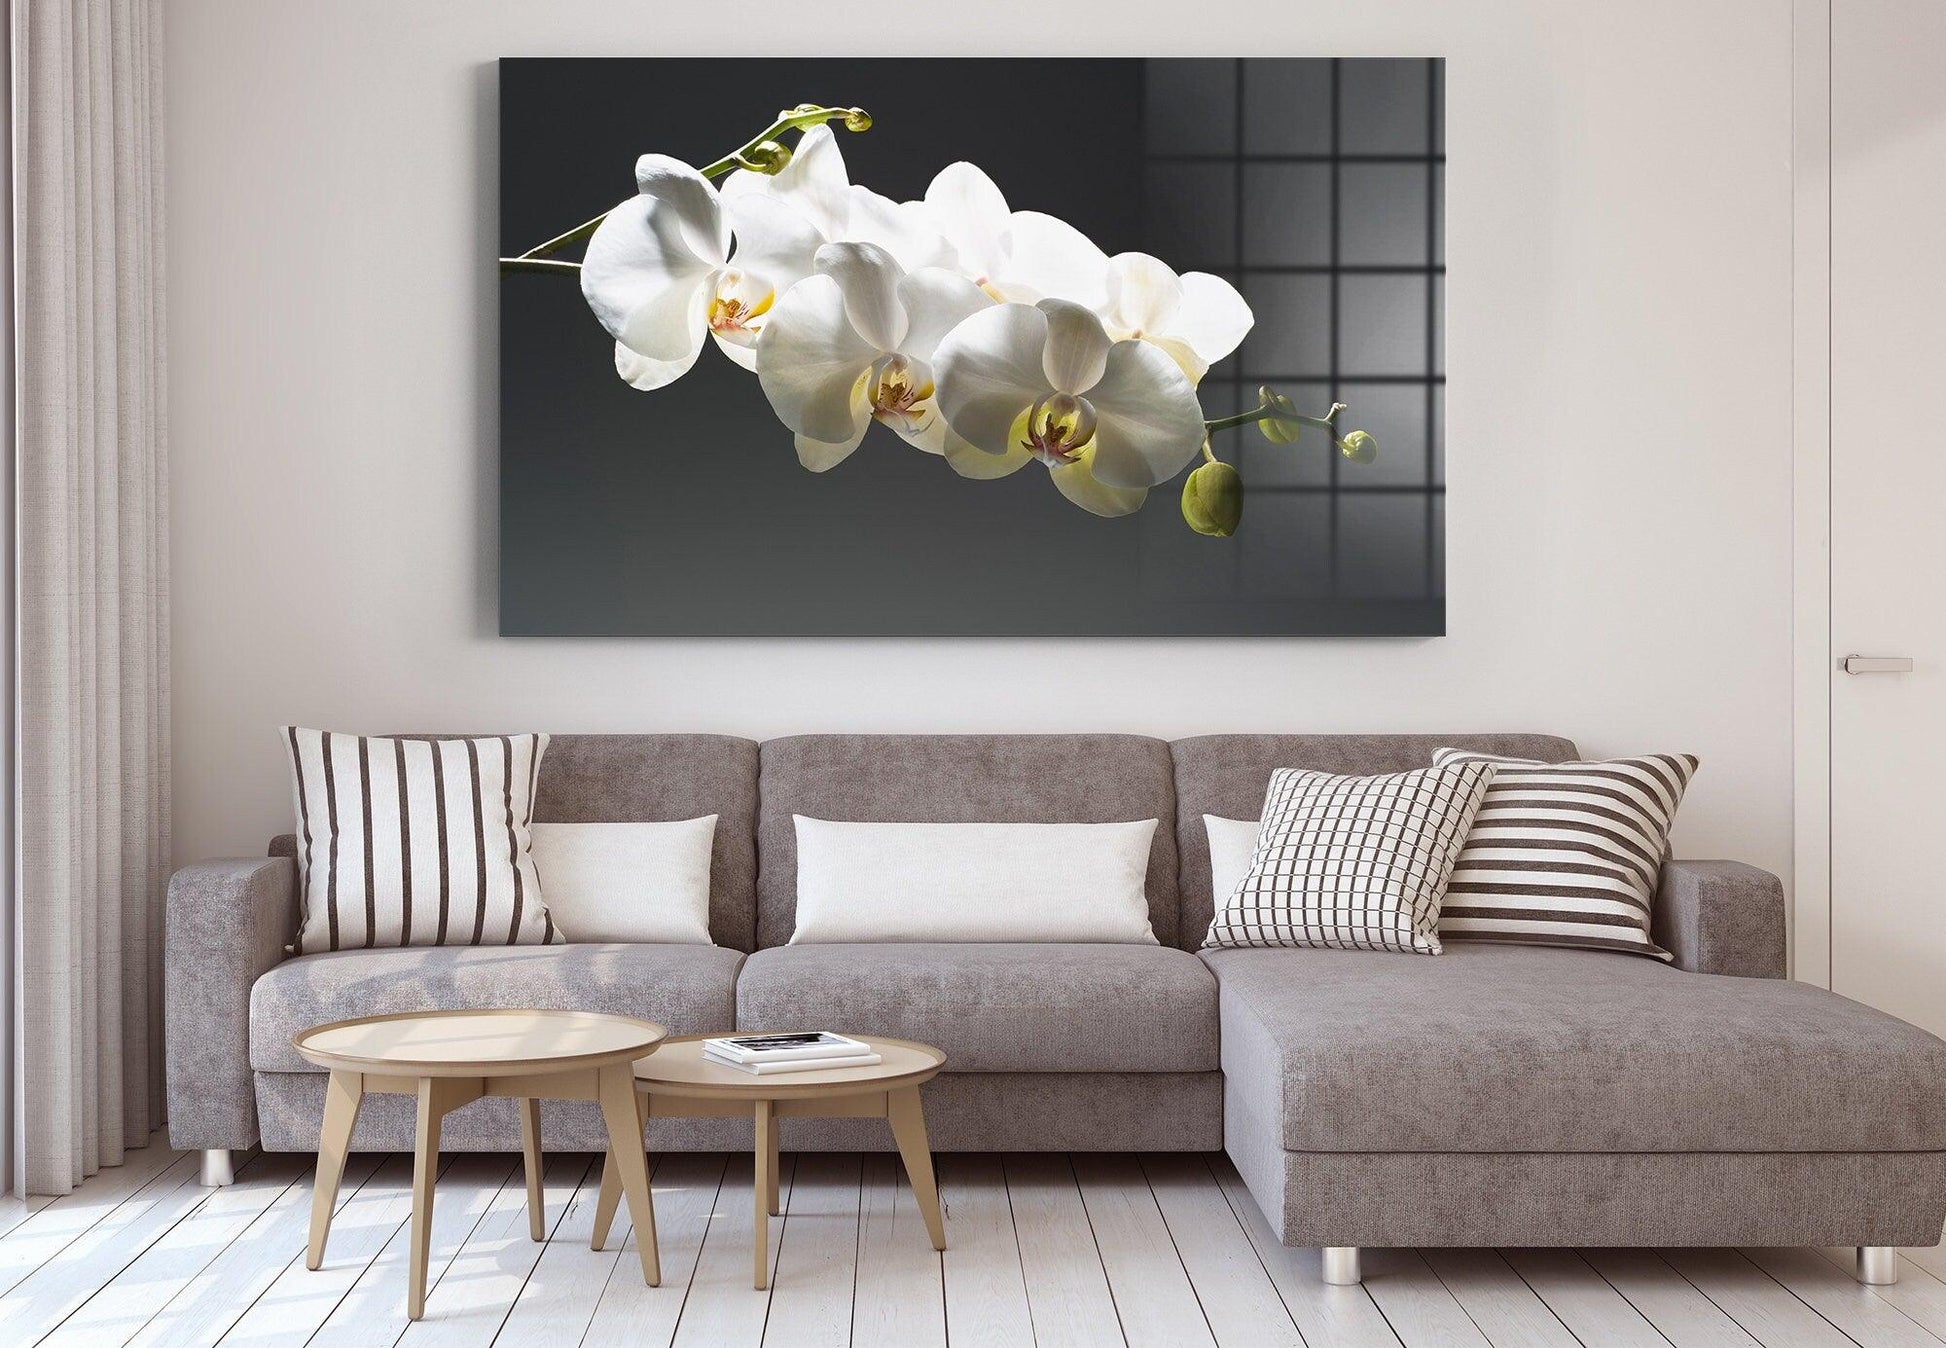 Flowers Tempered Glass Printing Wall Art| Natural And Vivid Wall Decor, White Flowers Landscape, Flowers glass wall decor, Housewarming Gift - TrendiArt